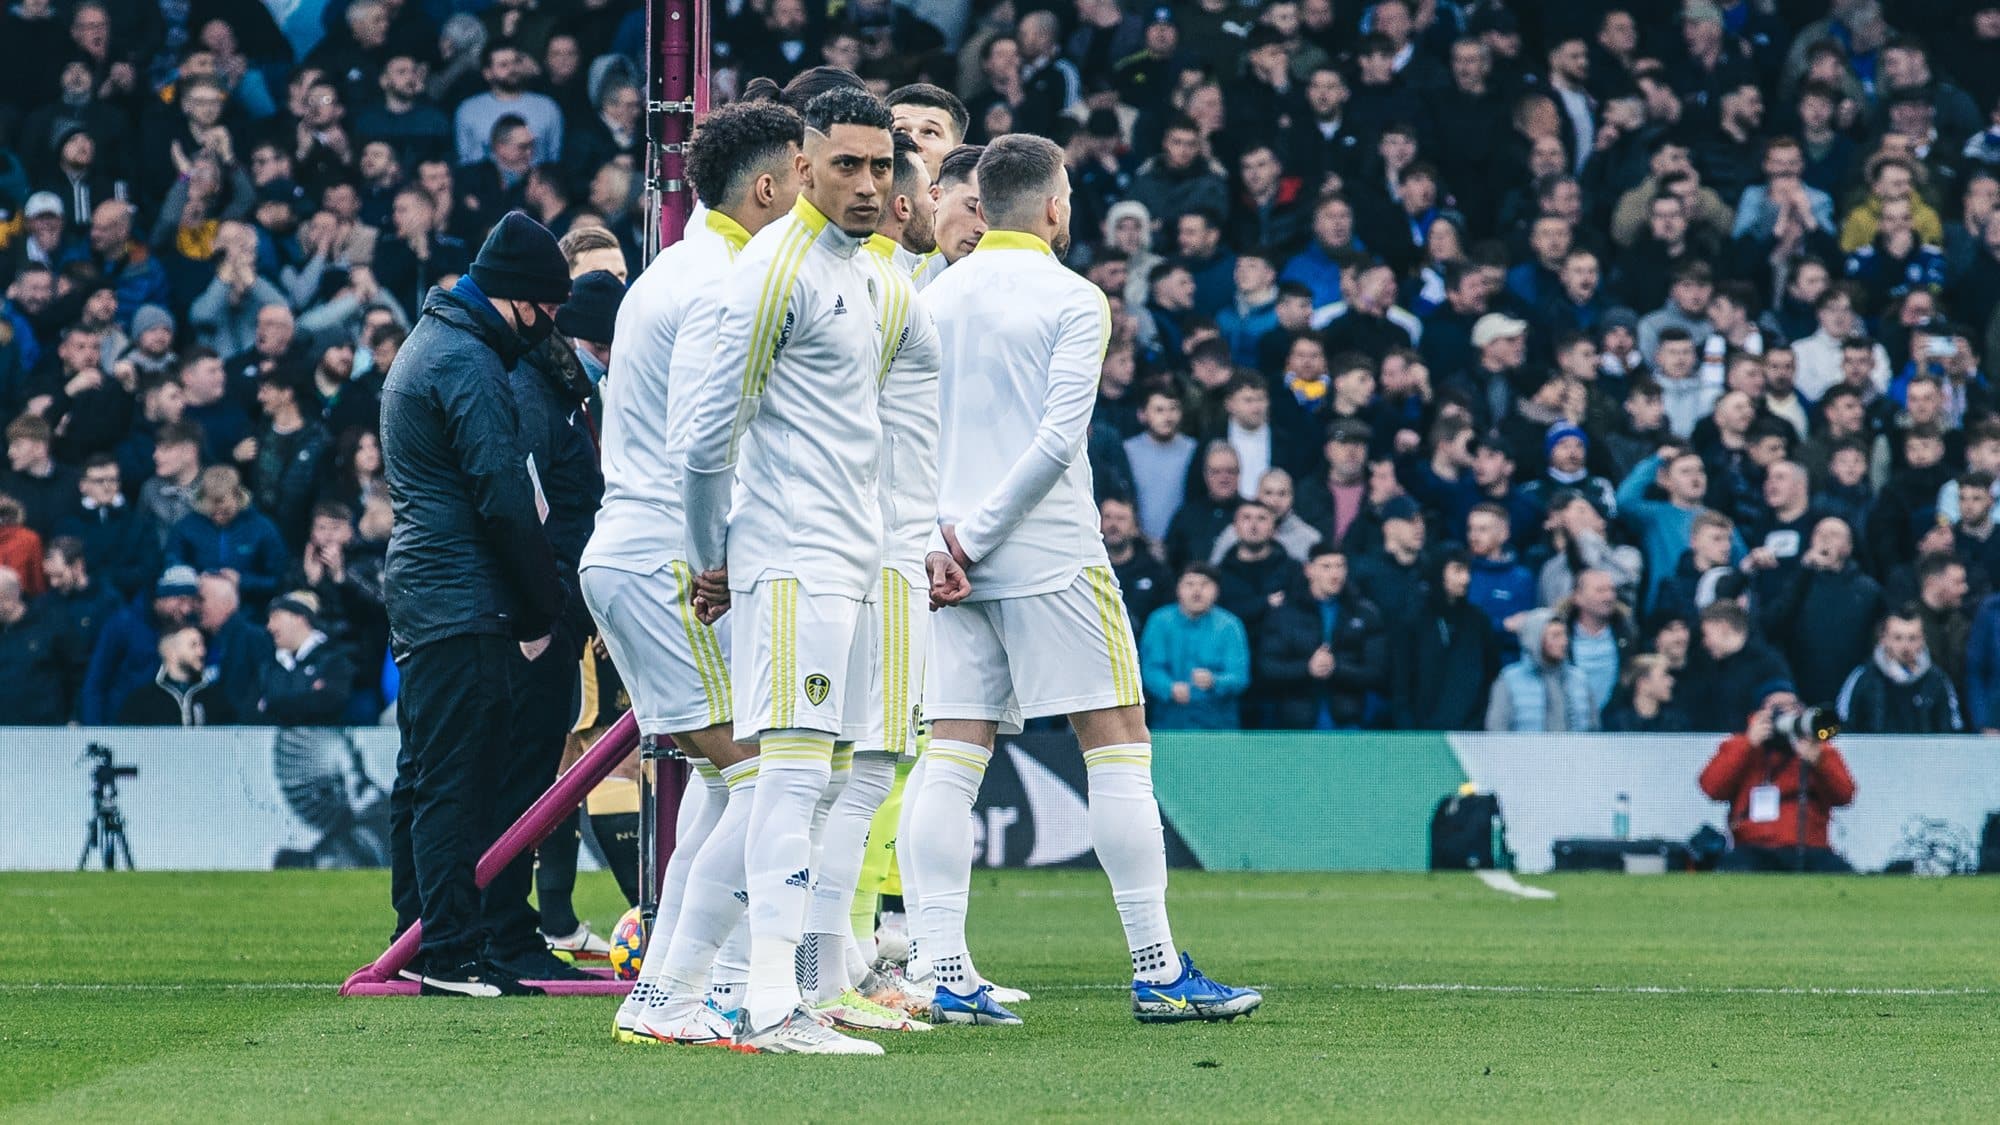 Raphinha staring angrily at something while Leeds line up before playing Newcastle, he must hate that Premier League anthem as much as everyone else